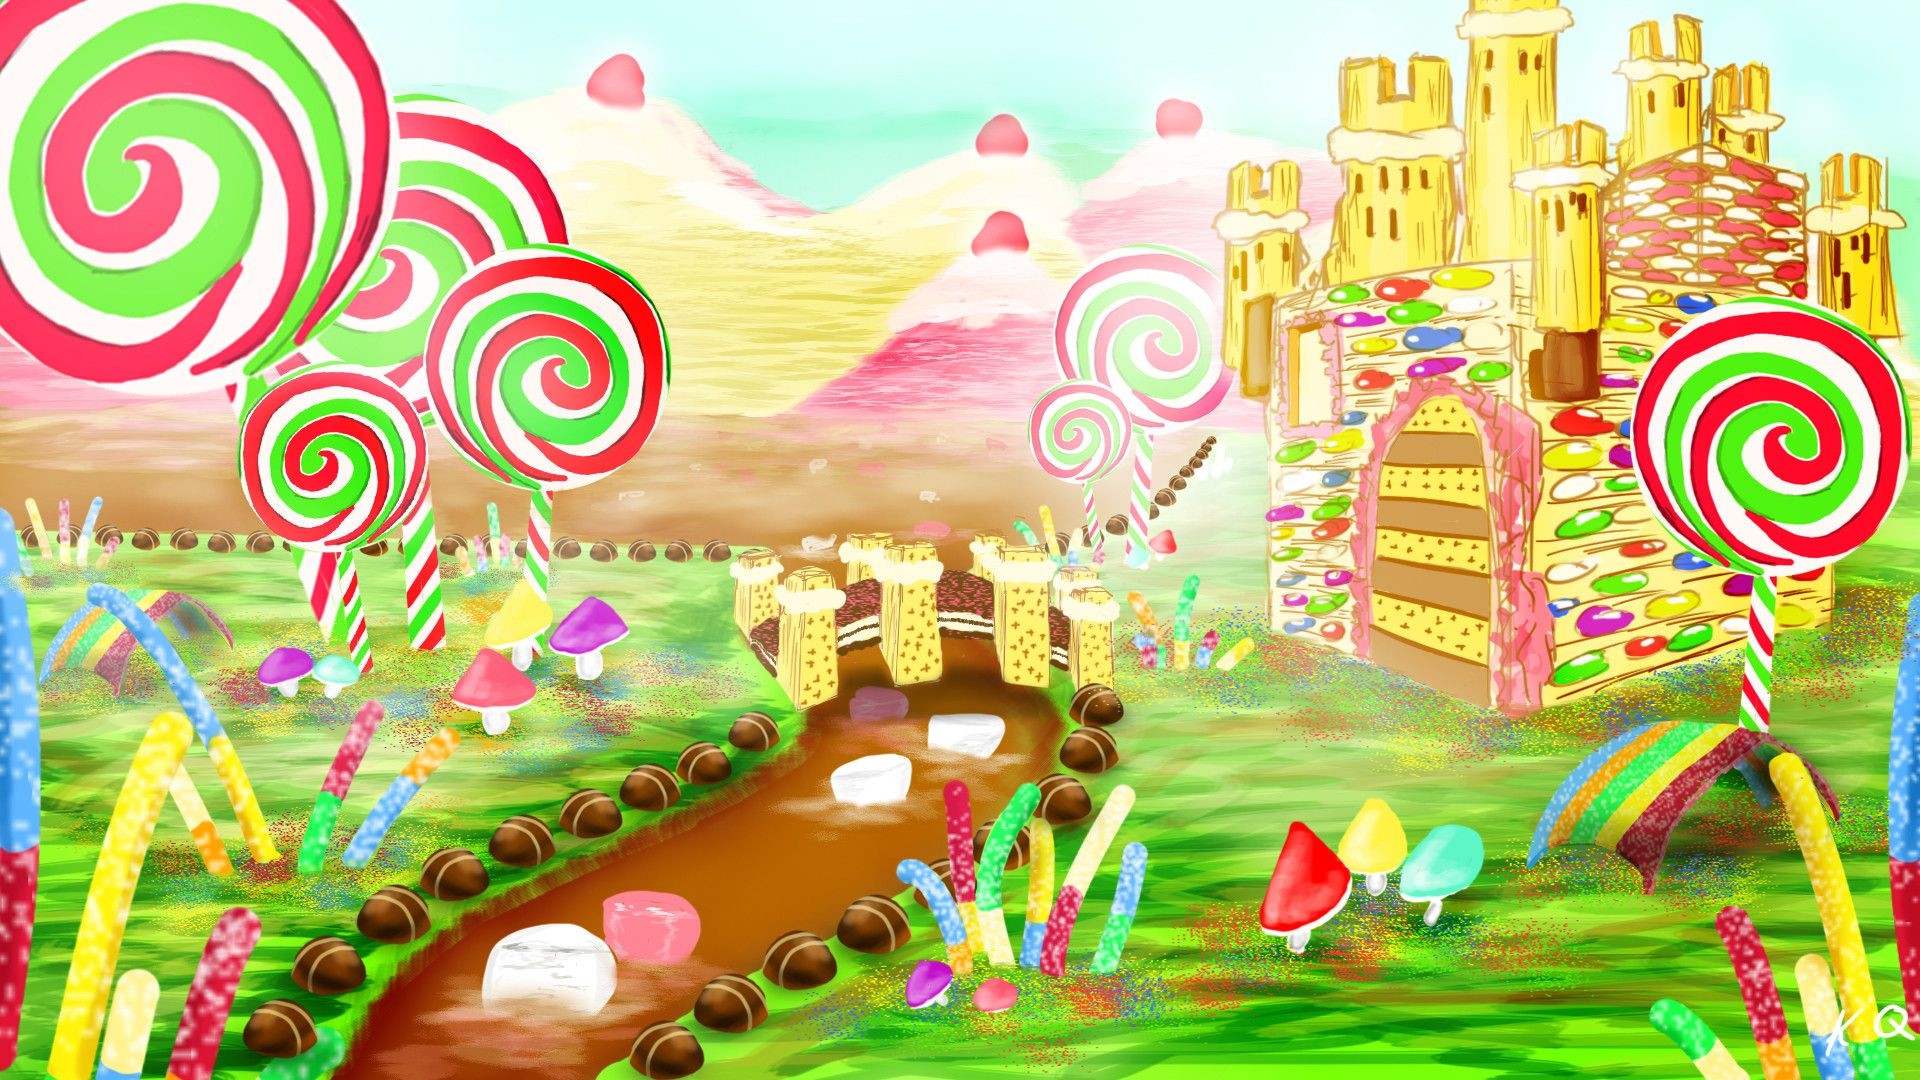 1920x1080 Candyland Wallpapers, Live Candyland Wallpapers, SYX193 Candyland .